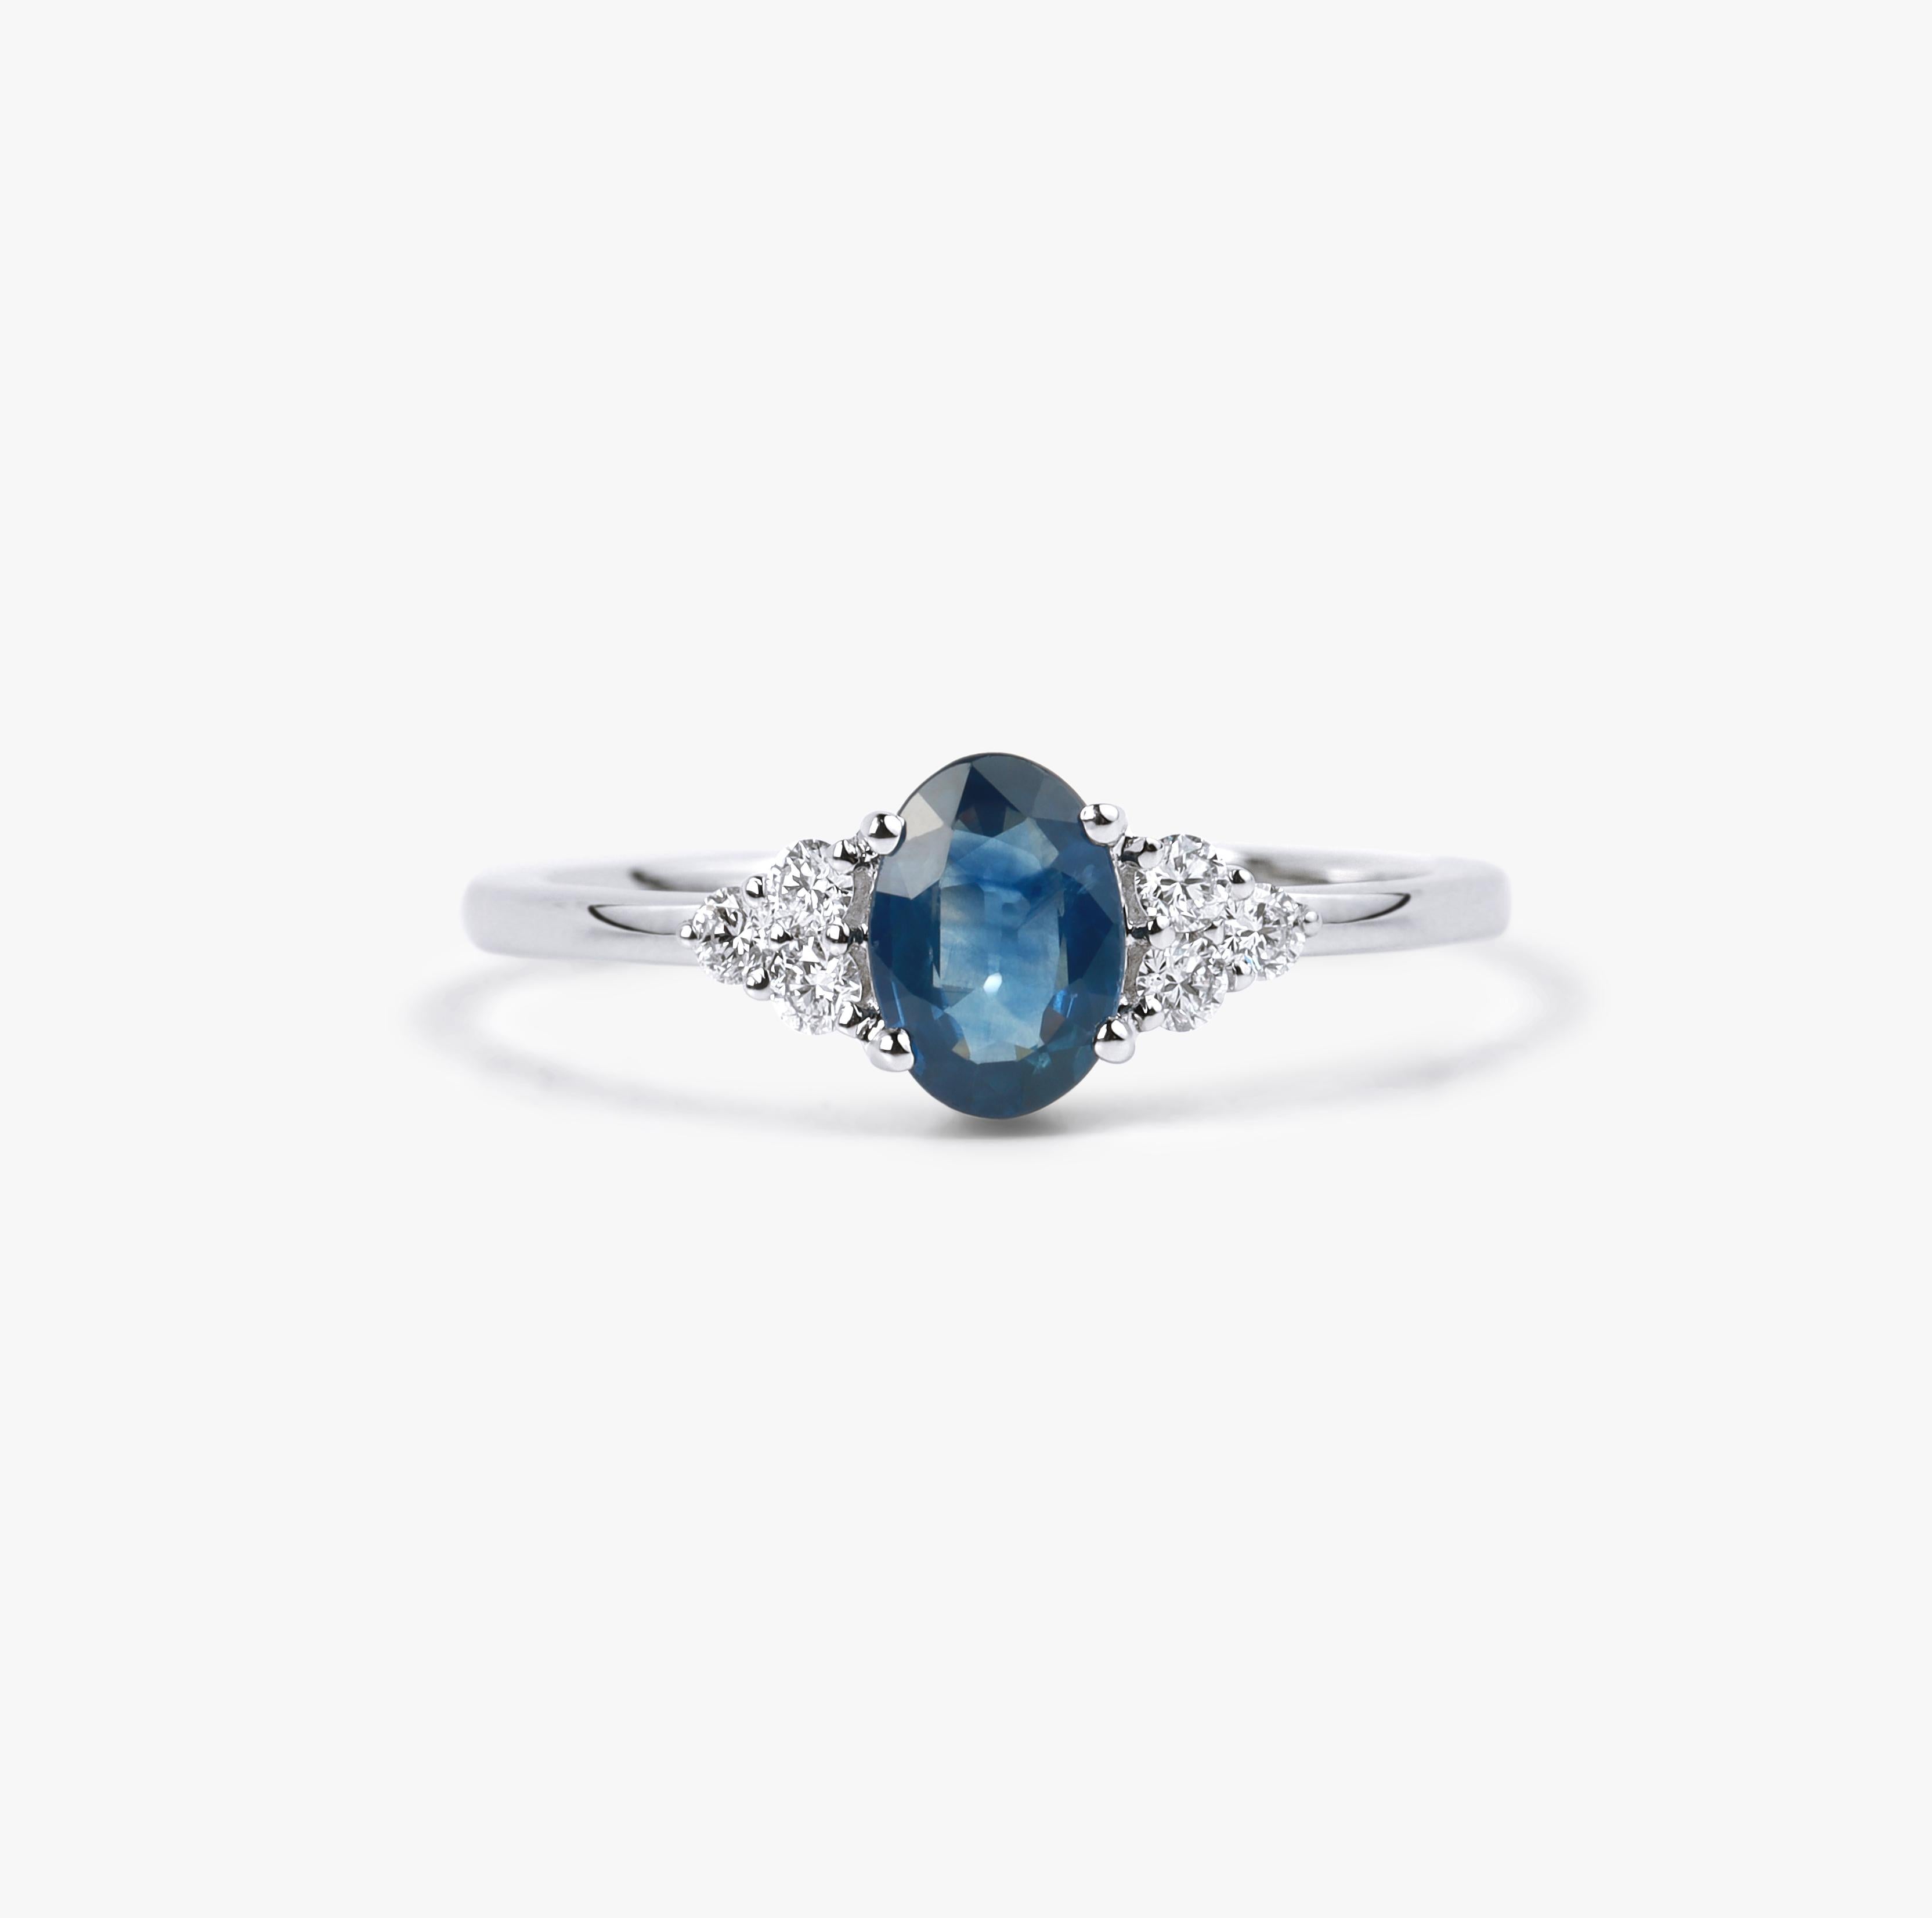 Oval Blue Sapphire Diamond Round Cut Double Halo Cocktail Engagement Ring

Available in 18k white gold.

Same design can be made also with other custom gemstones per request.

Product details:

- Solid gold (14k, 18k)

- approx. 5x7 CT sapphire